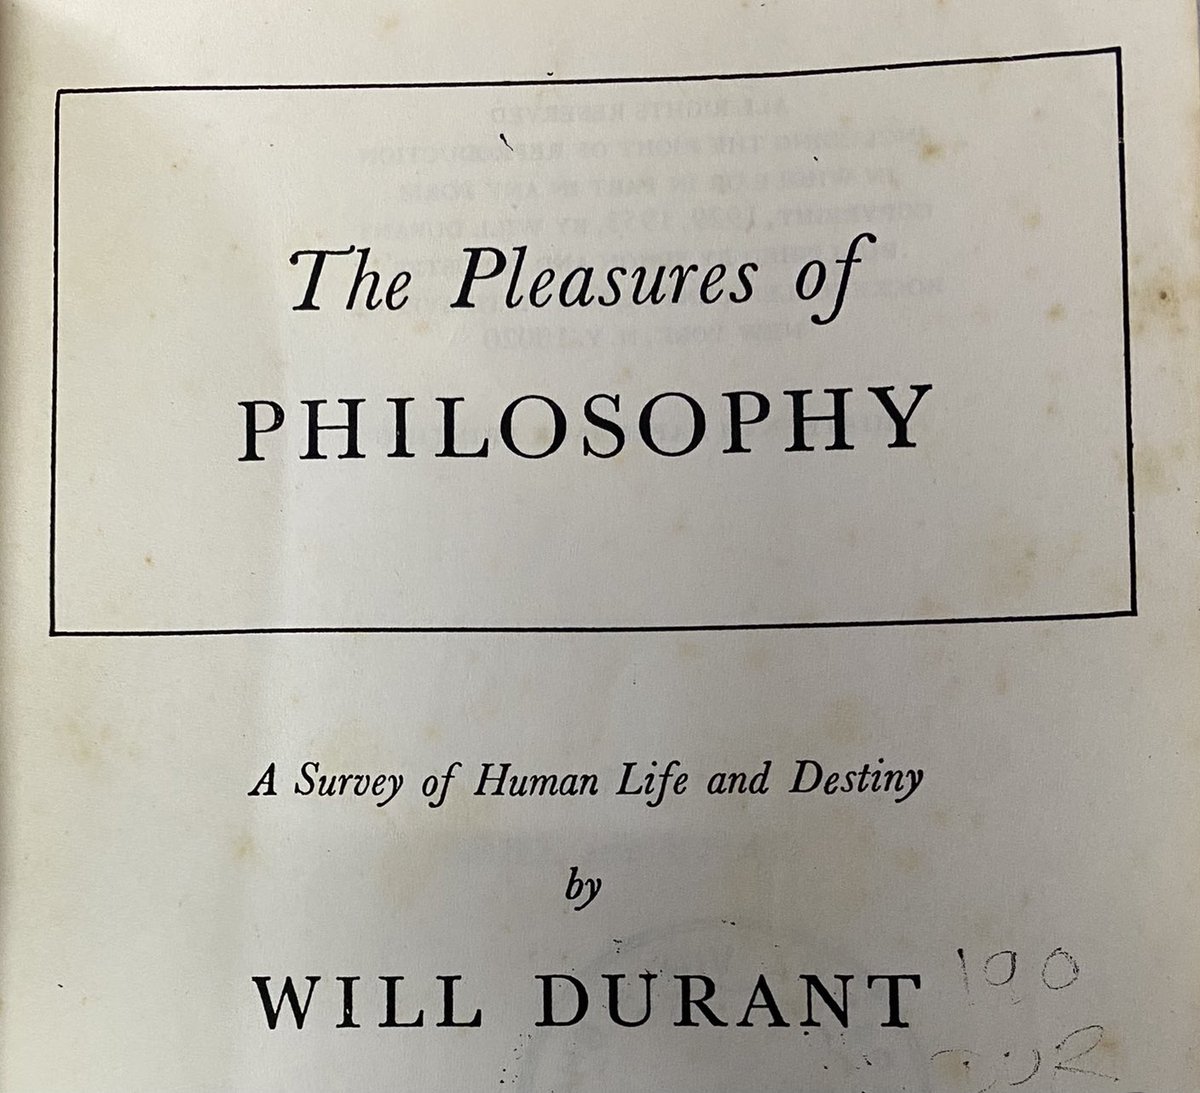 To a tweet asking for best book on introduction to philosophy, I suggested  #WillDurant ‘s  #ThePleasruesOfPhilosophy #Nostalgia made me reach out to it in my shelf & start reading it again. What a delightful prose; a treat to intellect. #Thread of excerpts 1/n